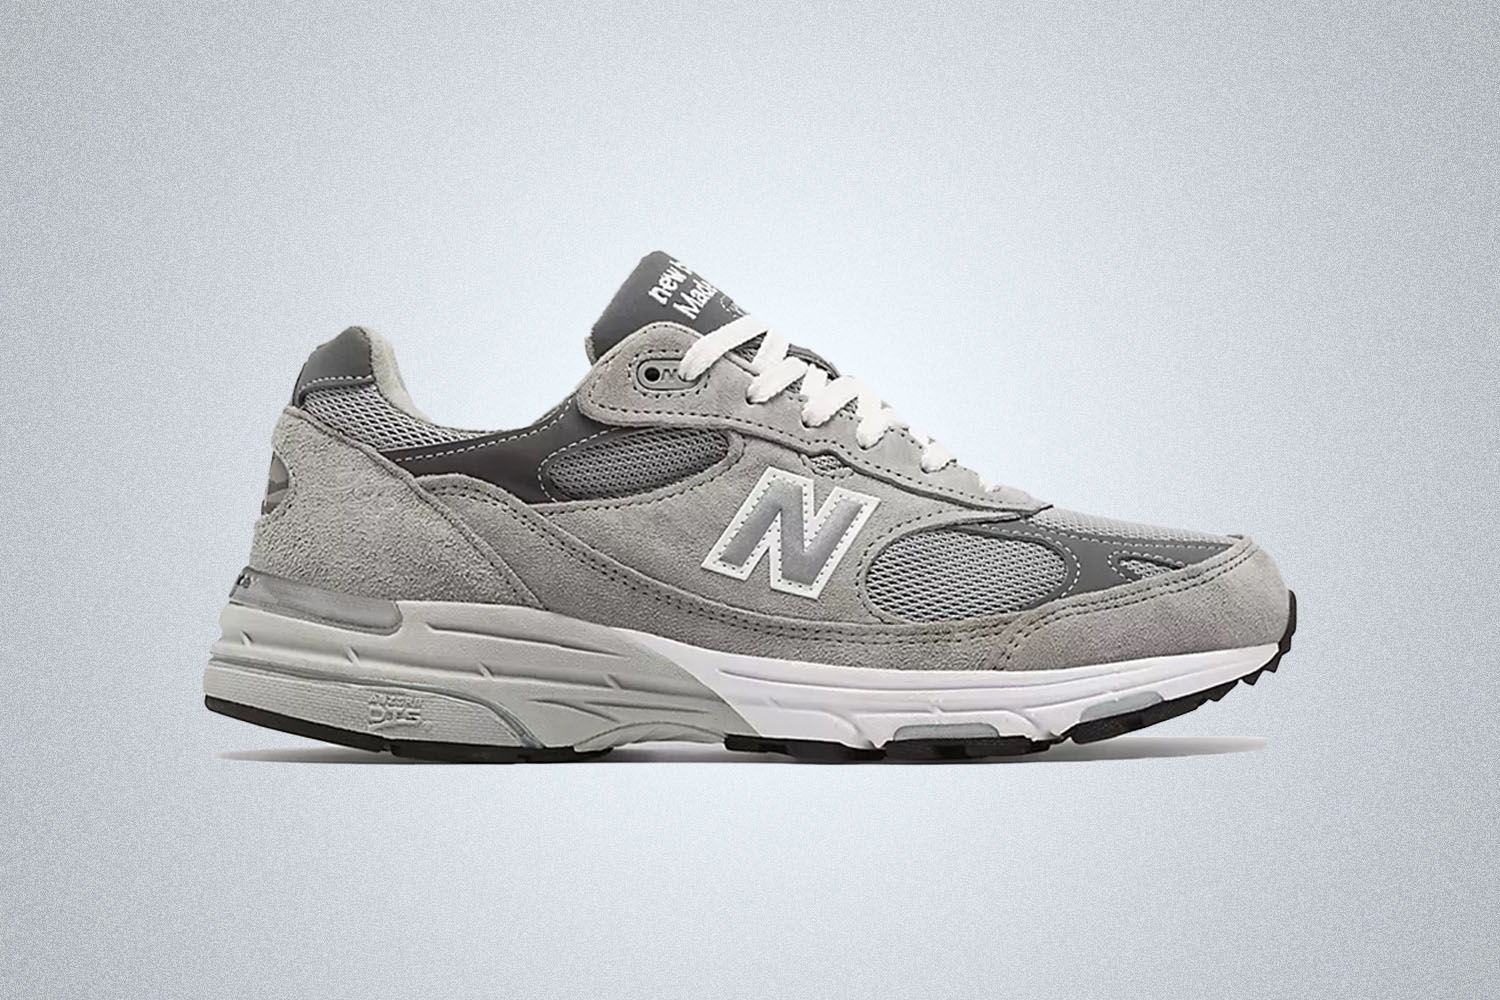 New Balance Models: The Complete Guide From 574 to 990 - InsideHook